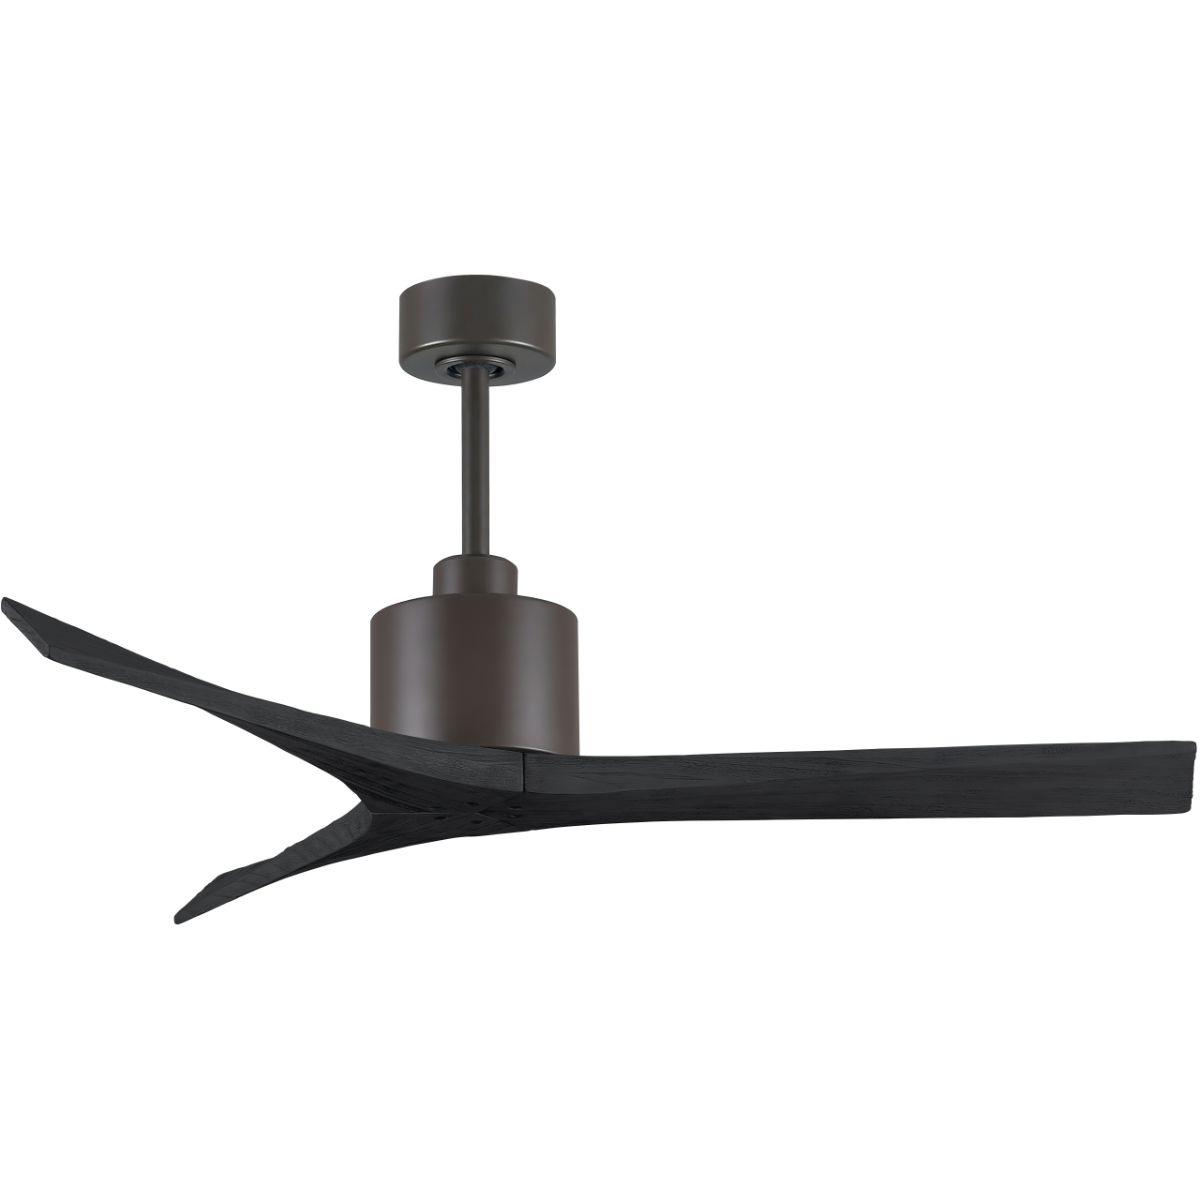 Mollywood 52 Inch Propeller Outdoor Ceiling Fan With Remote And Wall Control